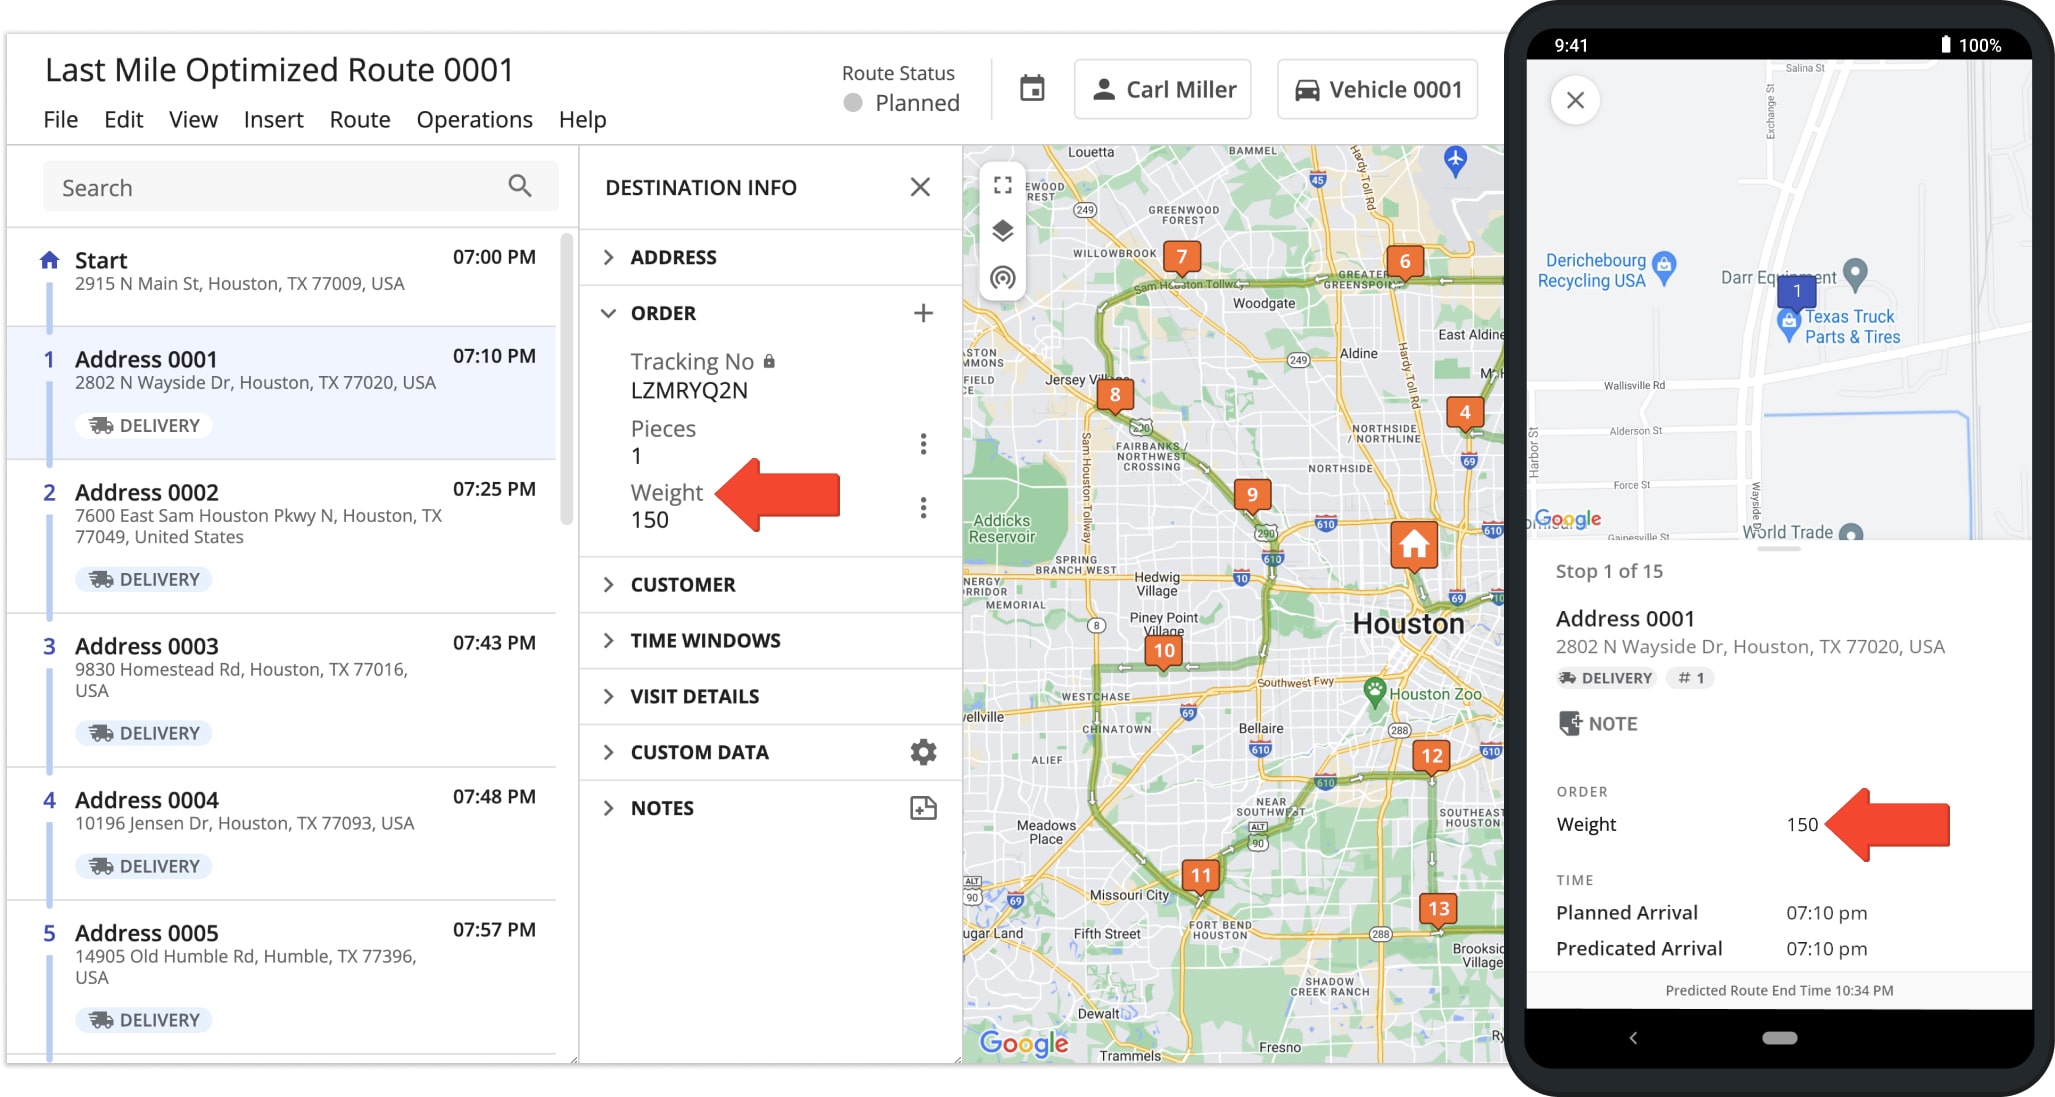 Changes made to routes or route destinations, such as modifying the Weight Business Rule for an address are automatically synched to the connected devices of all respective users associated with the route or main Route4Me account.